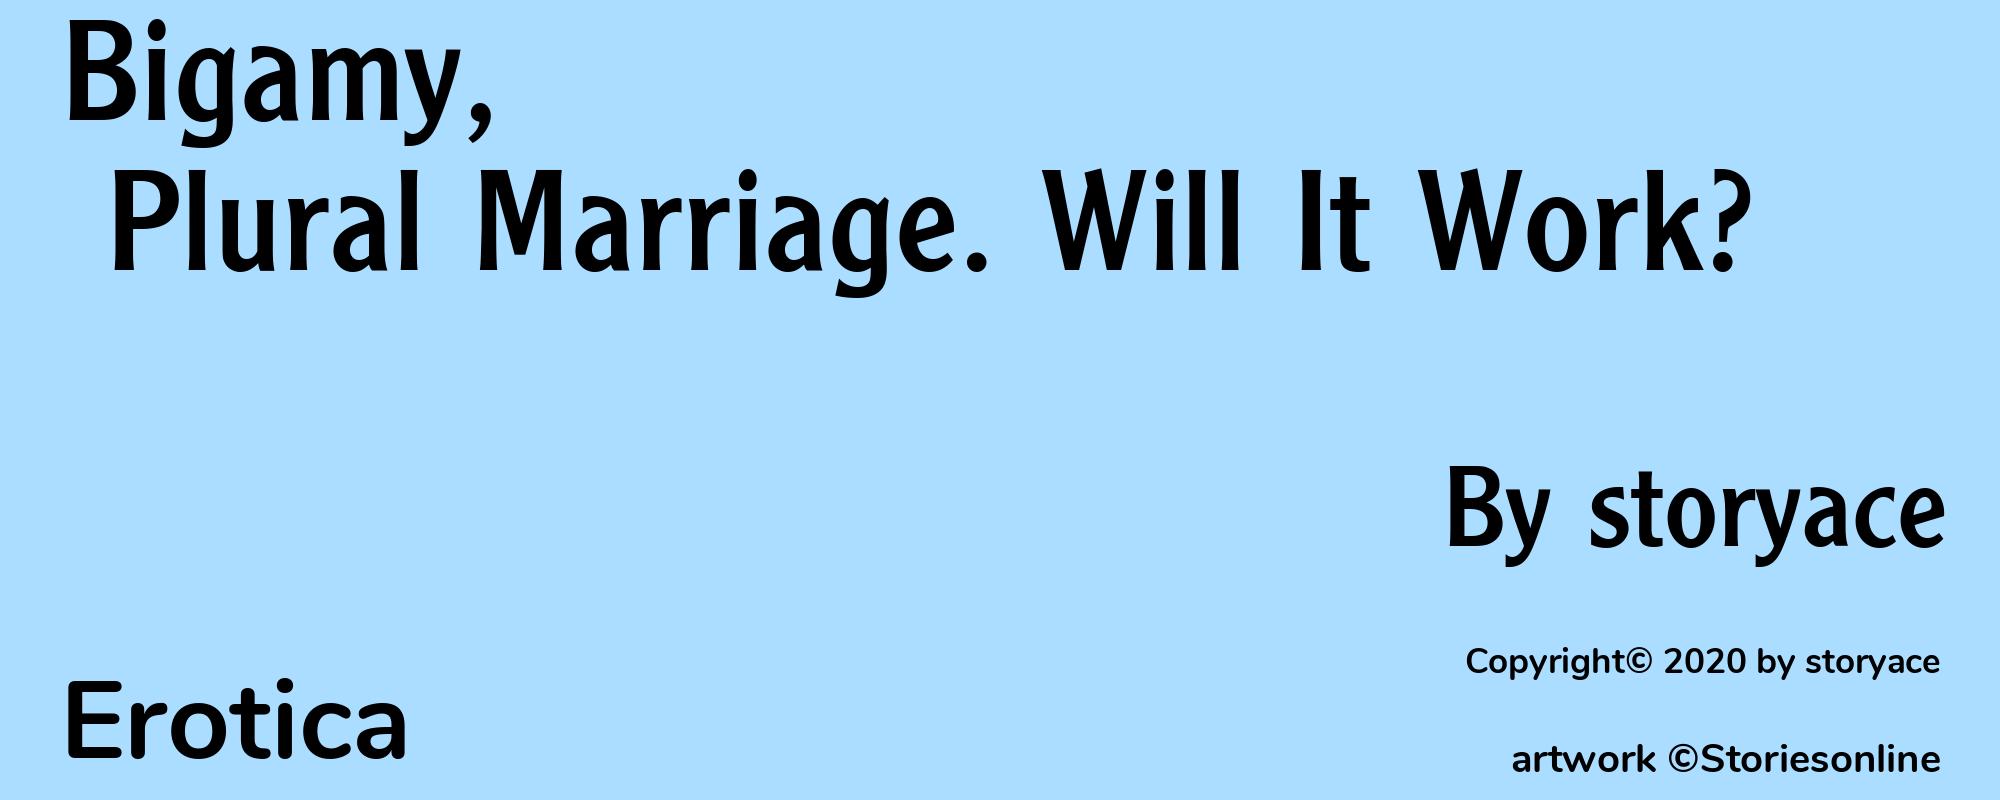 Bigamy, Plural Marriage. Will It Work? - Cover